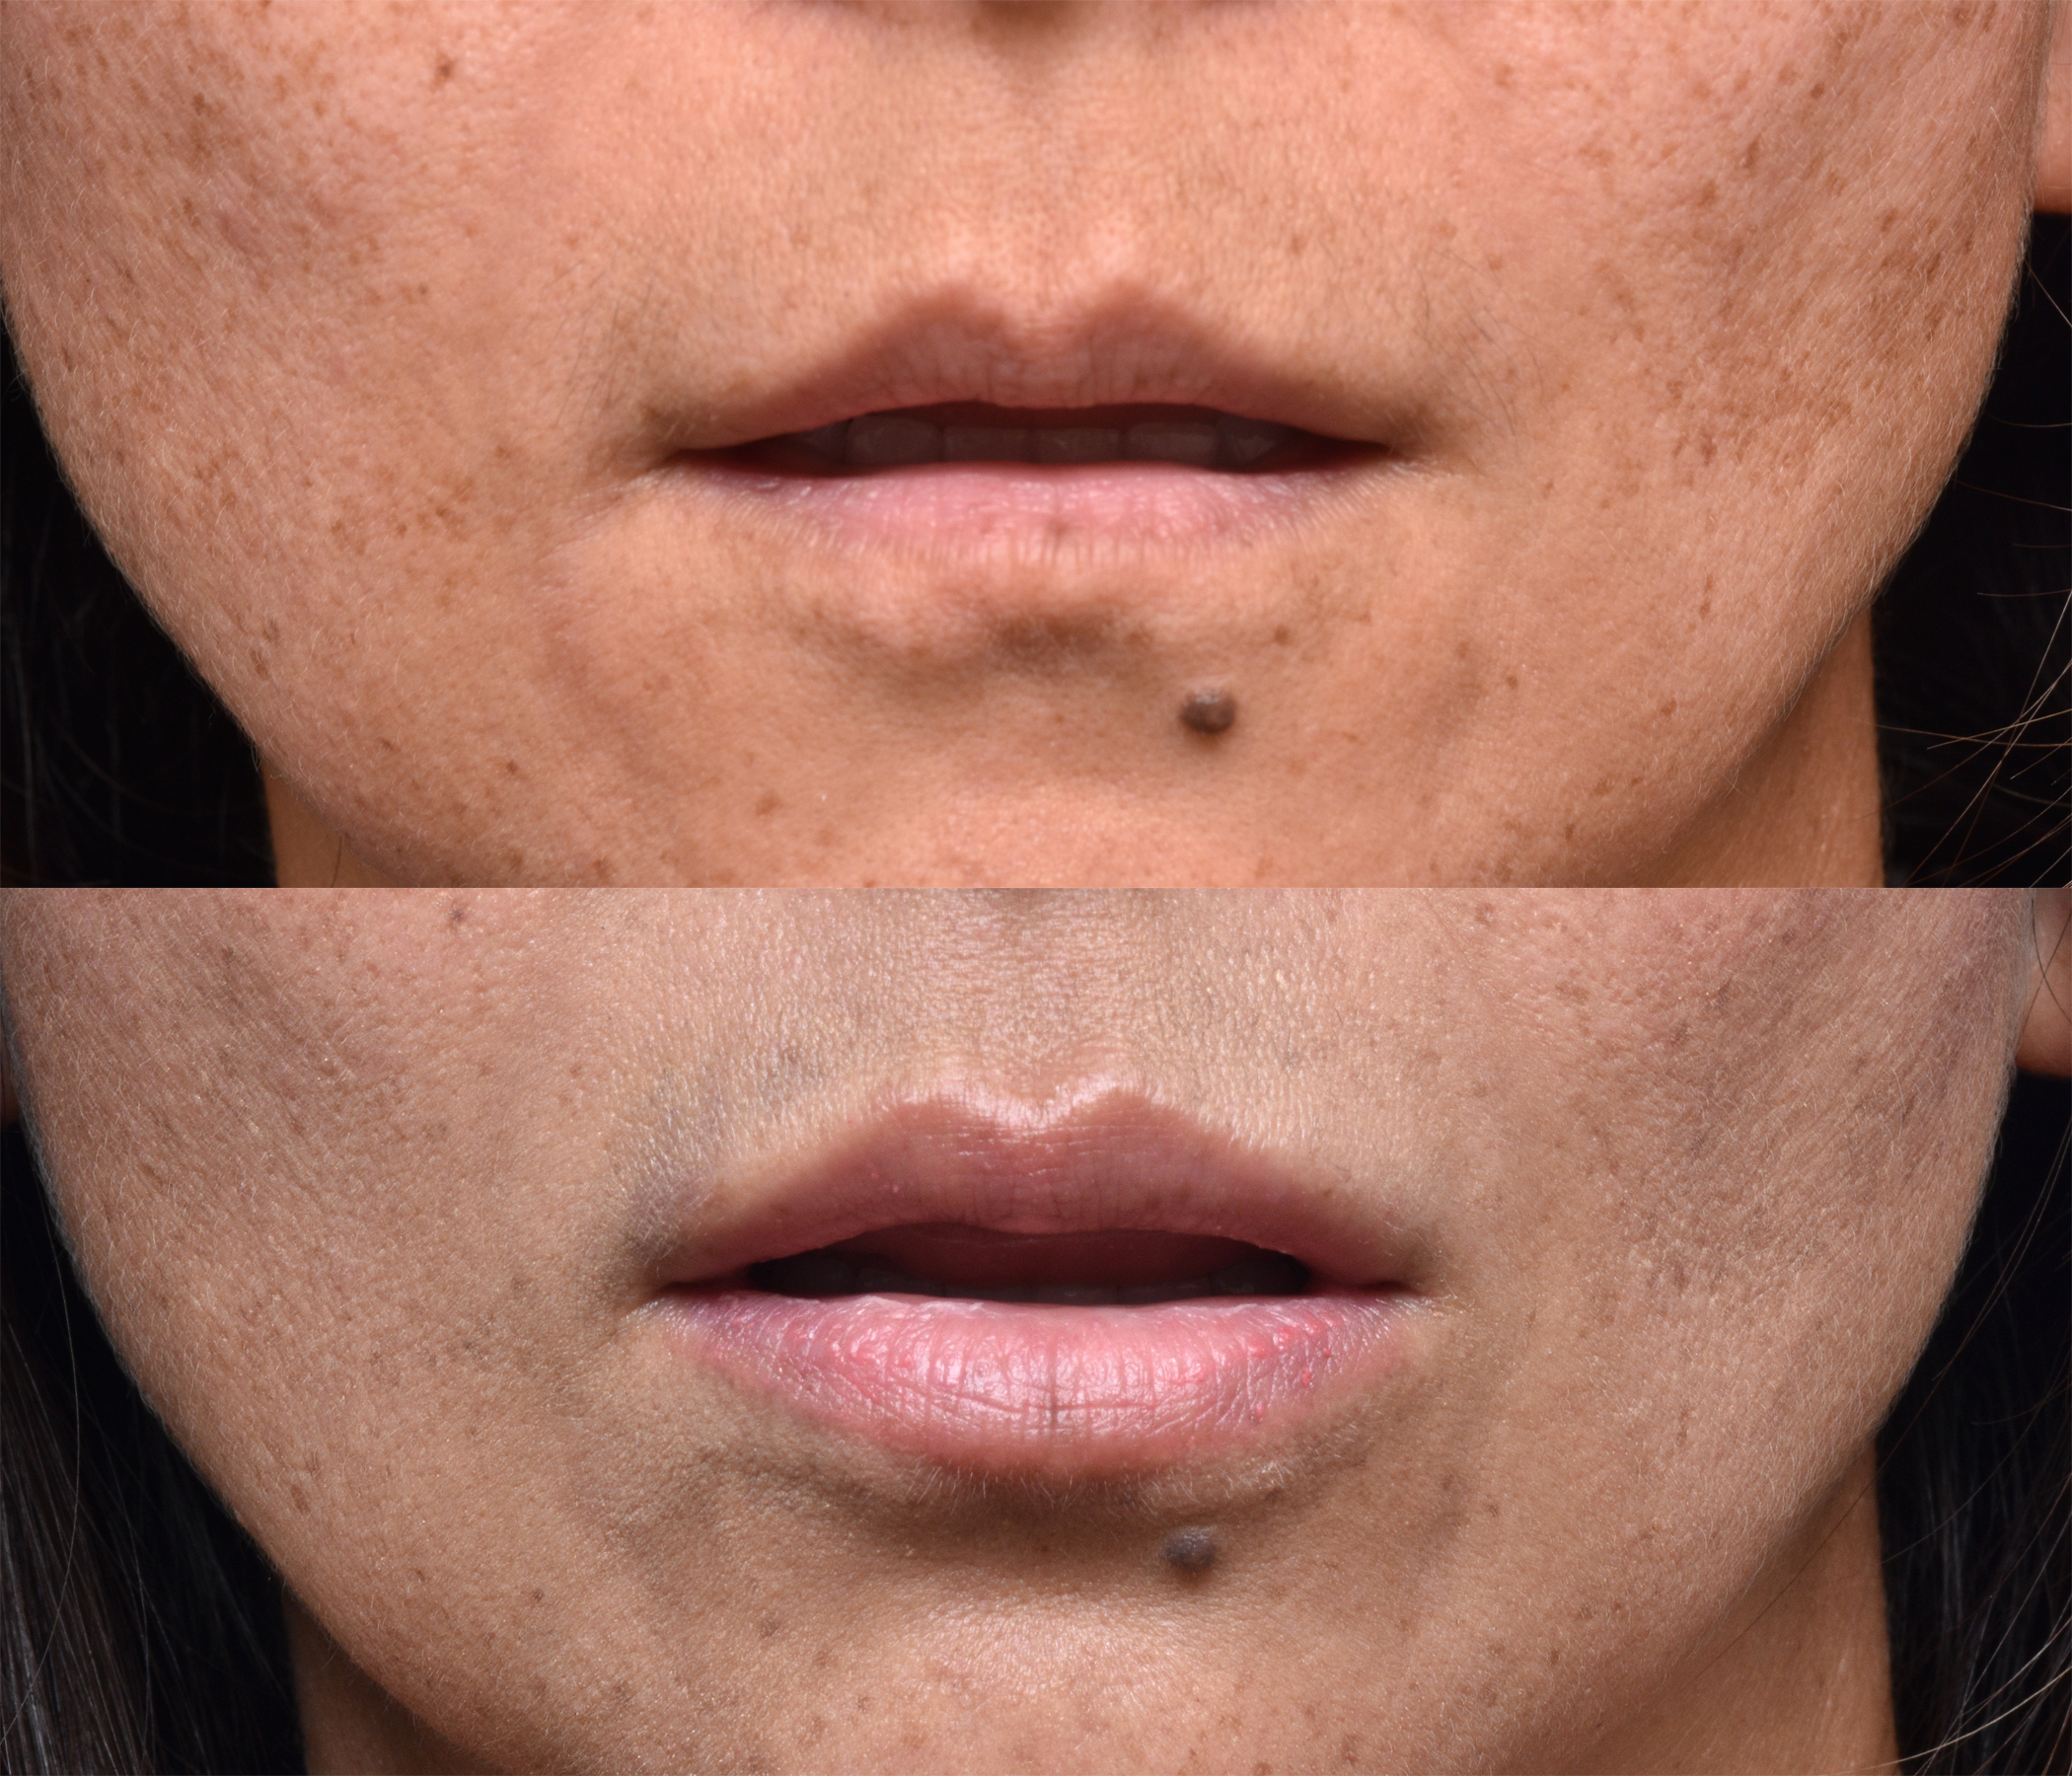 This patient received Lip Implants.